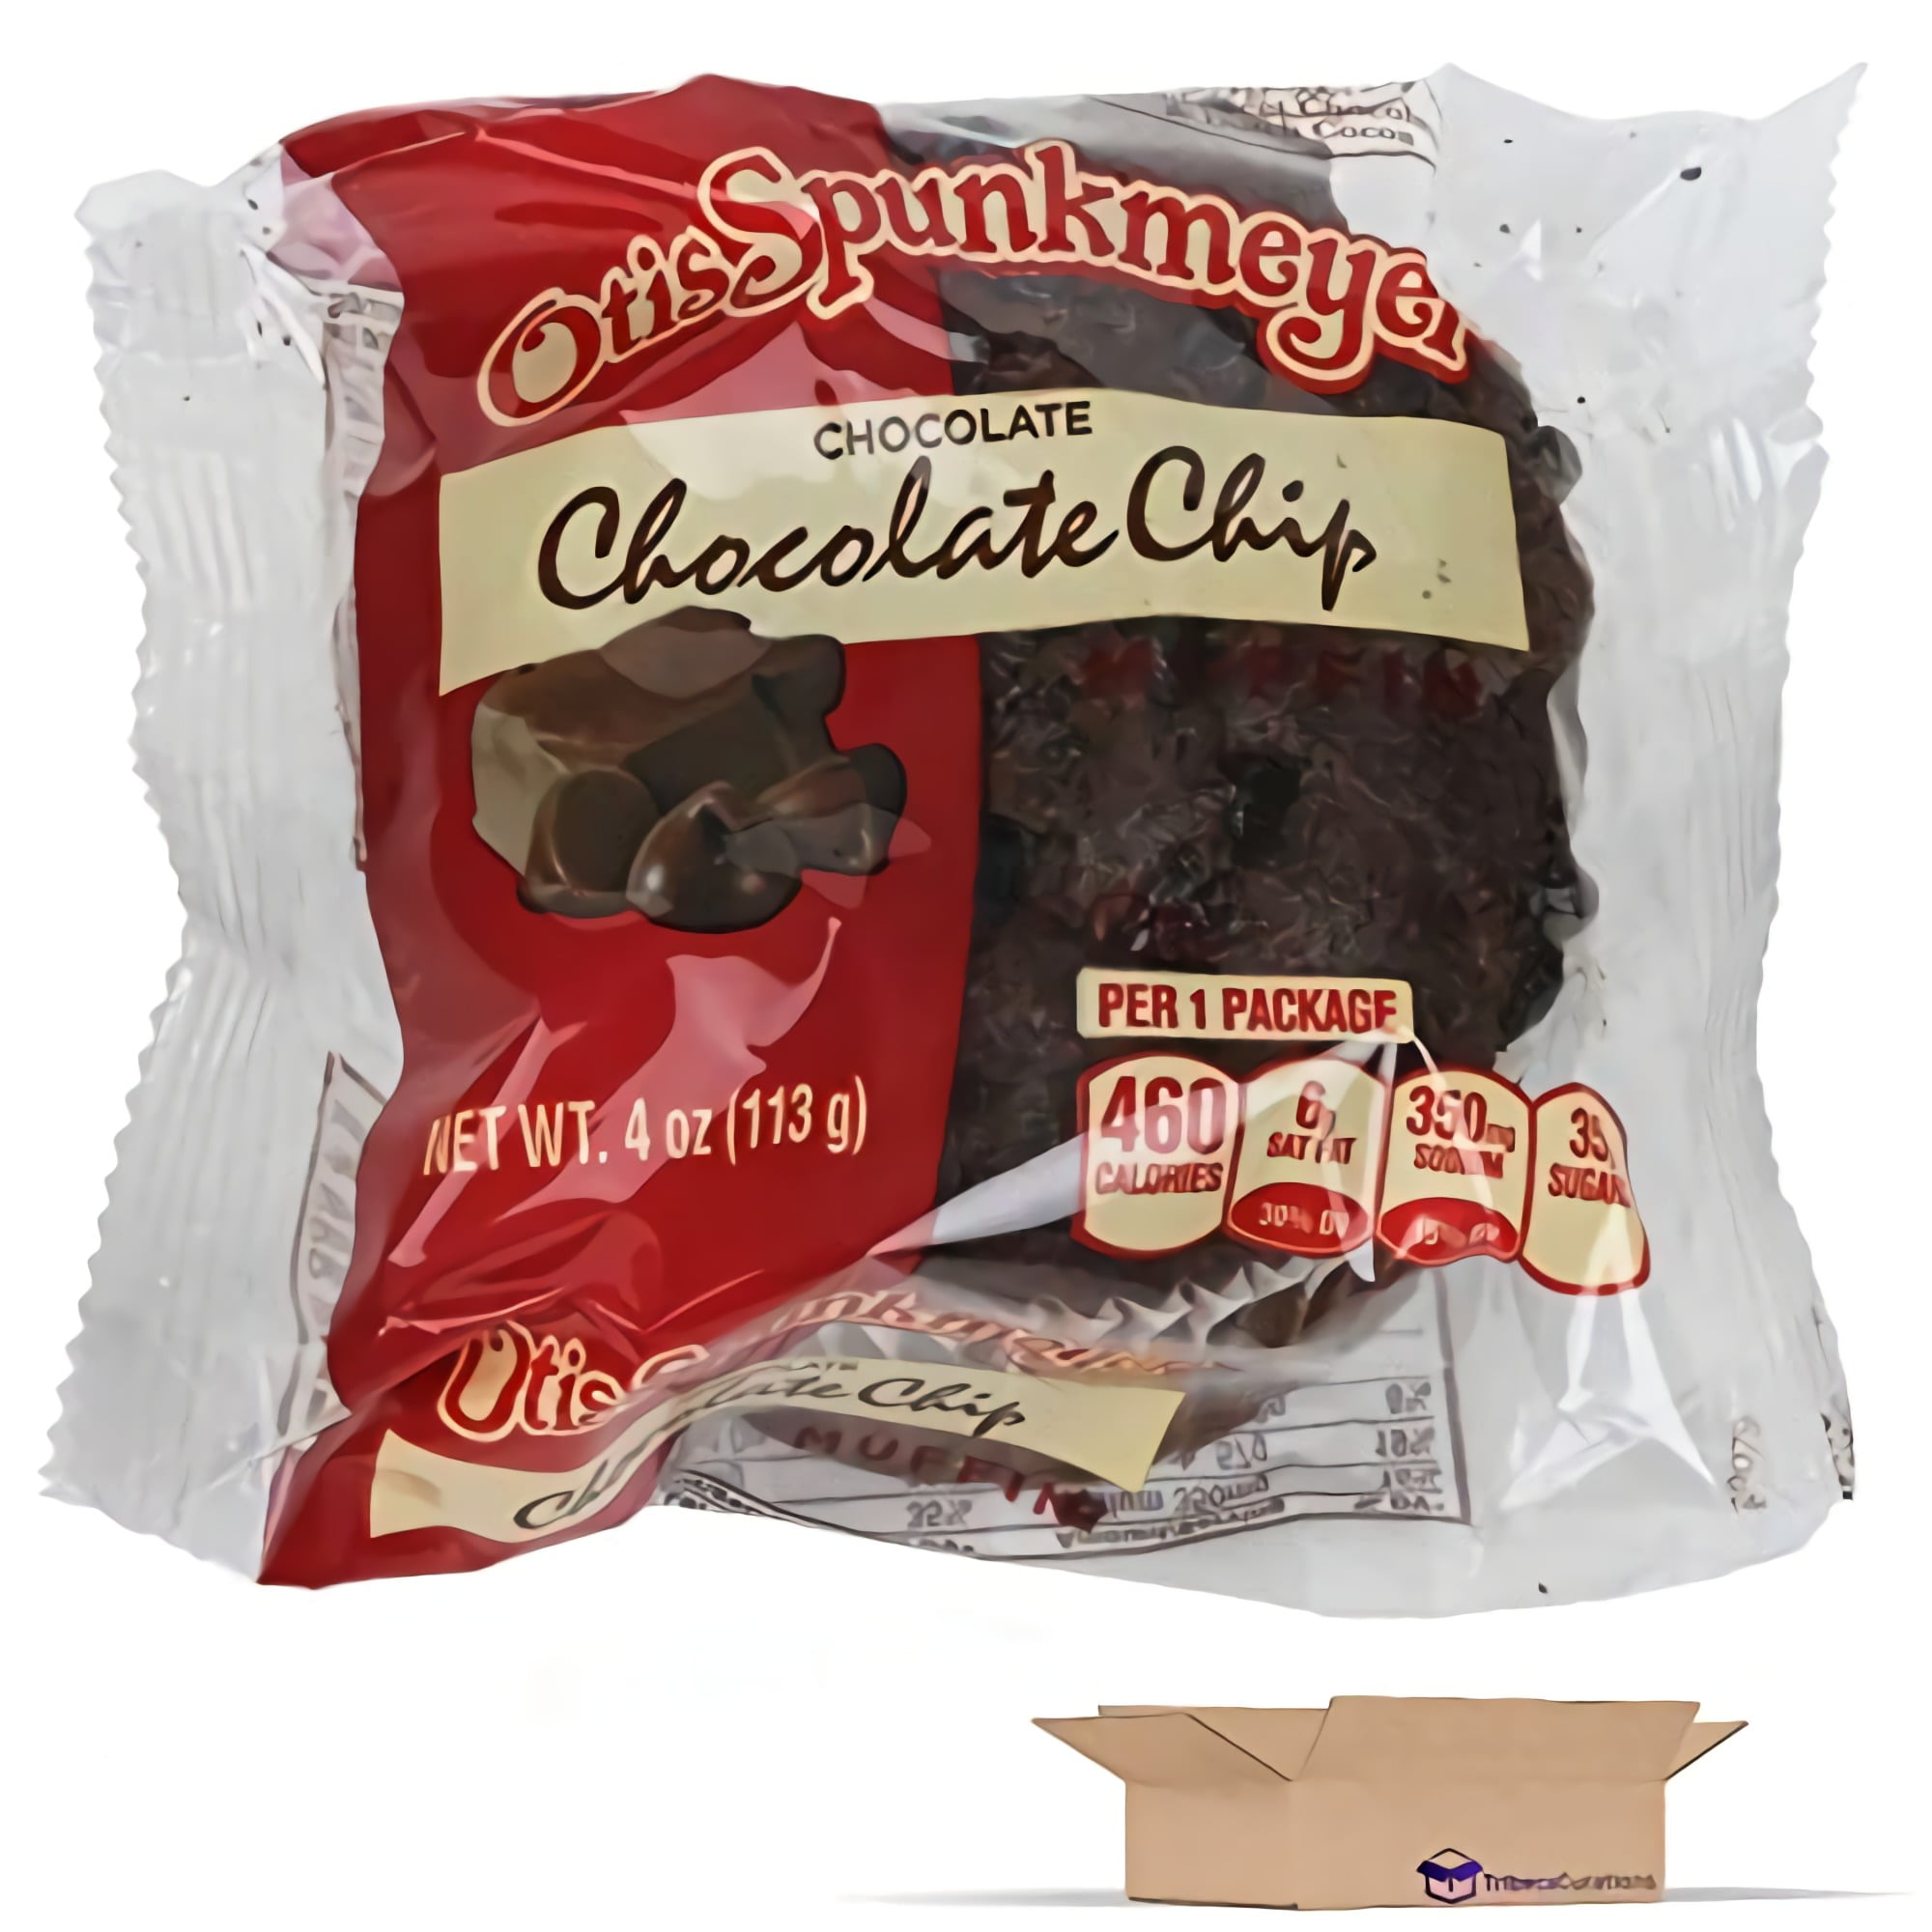 Individually Wrapped Muffins By Otis Spunkmeyer 4 Ounce Pack Of 12 Chocolate Chocolate Chip 